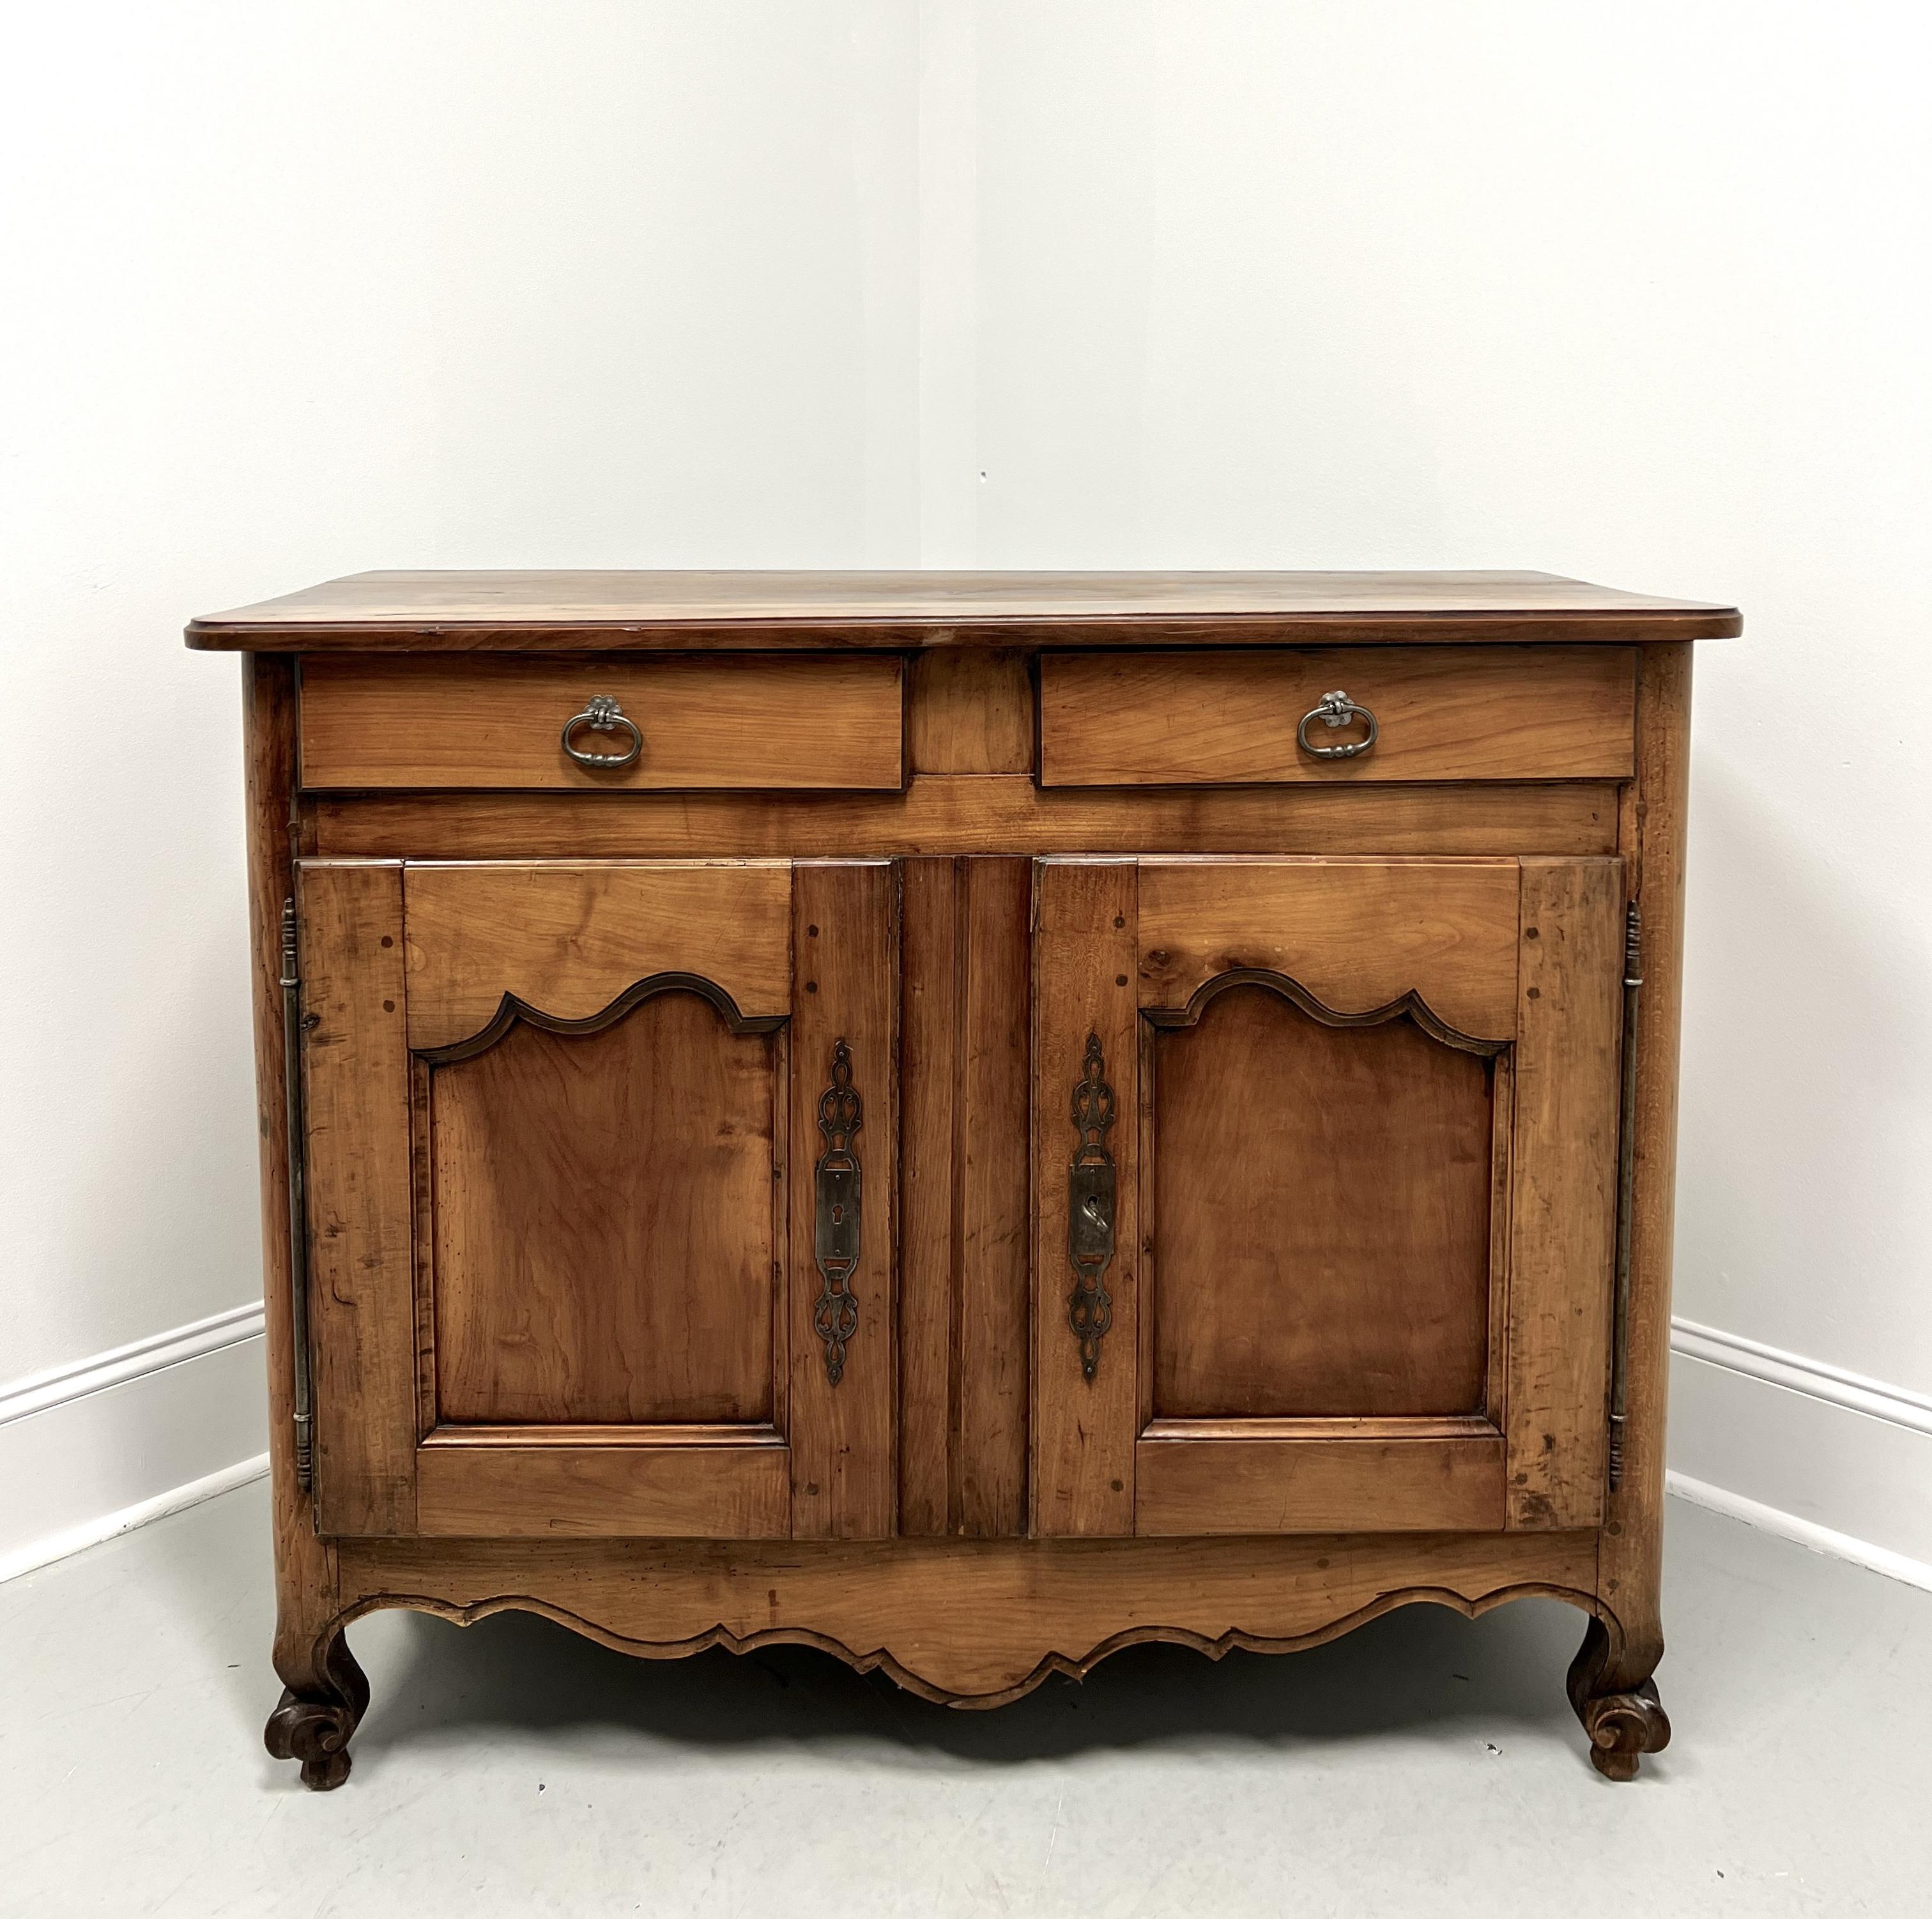 An antique French Louis XV style buffet server, unbranded. Fruitwood with brass hardware, bevel edge to the top with rounded corners, decoratively carved apron, and scroll front feet.  Features two drawers of dovetail construction, over two lockable